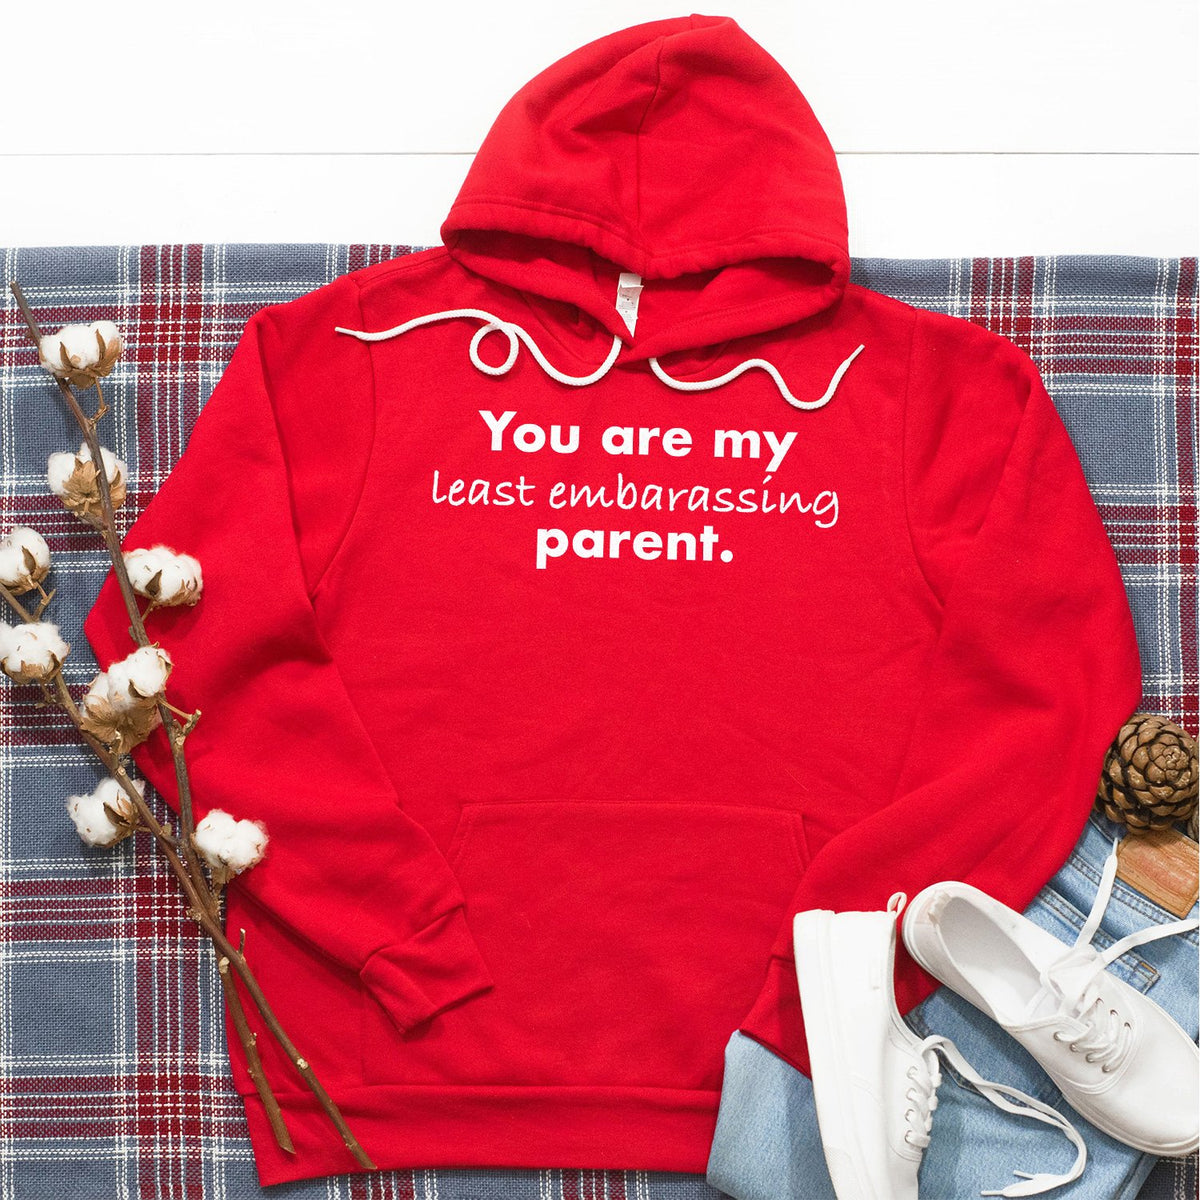 You Are My Least Embarassing Parent - Hoodie Sweatshirt